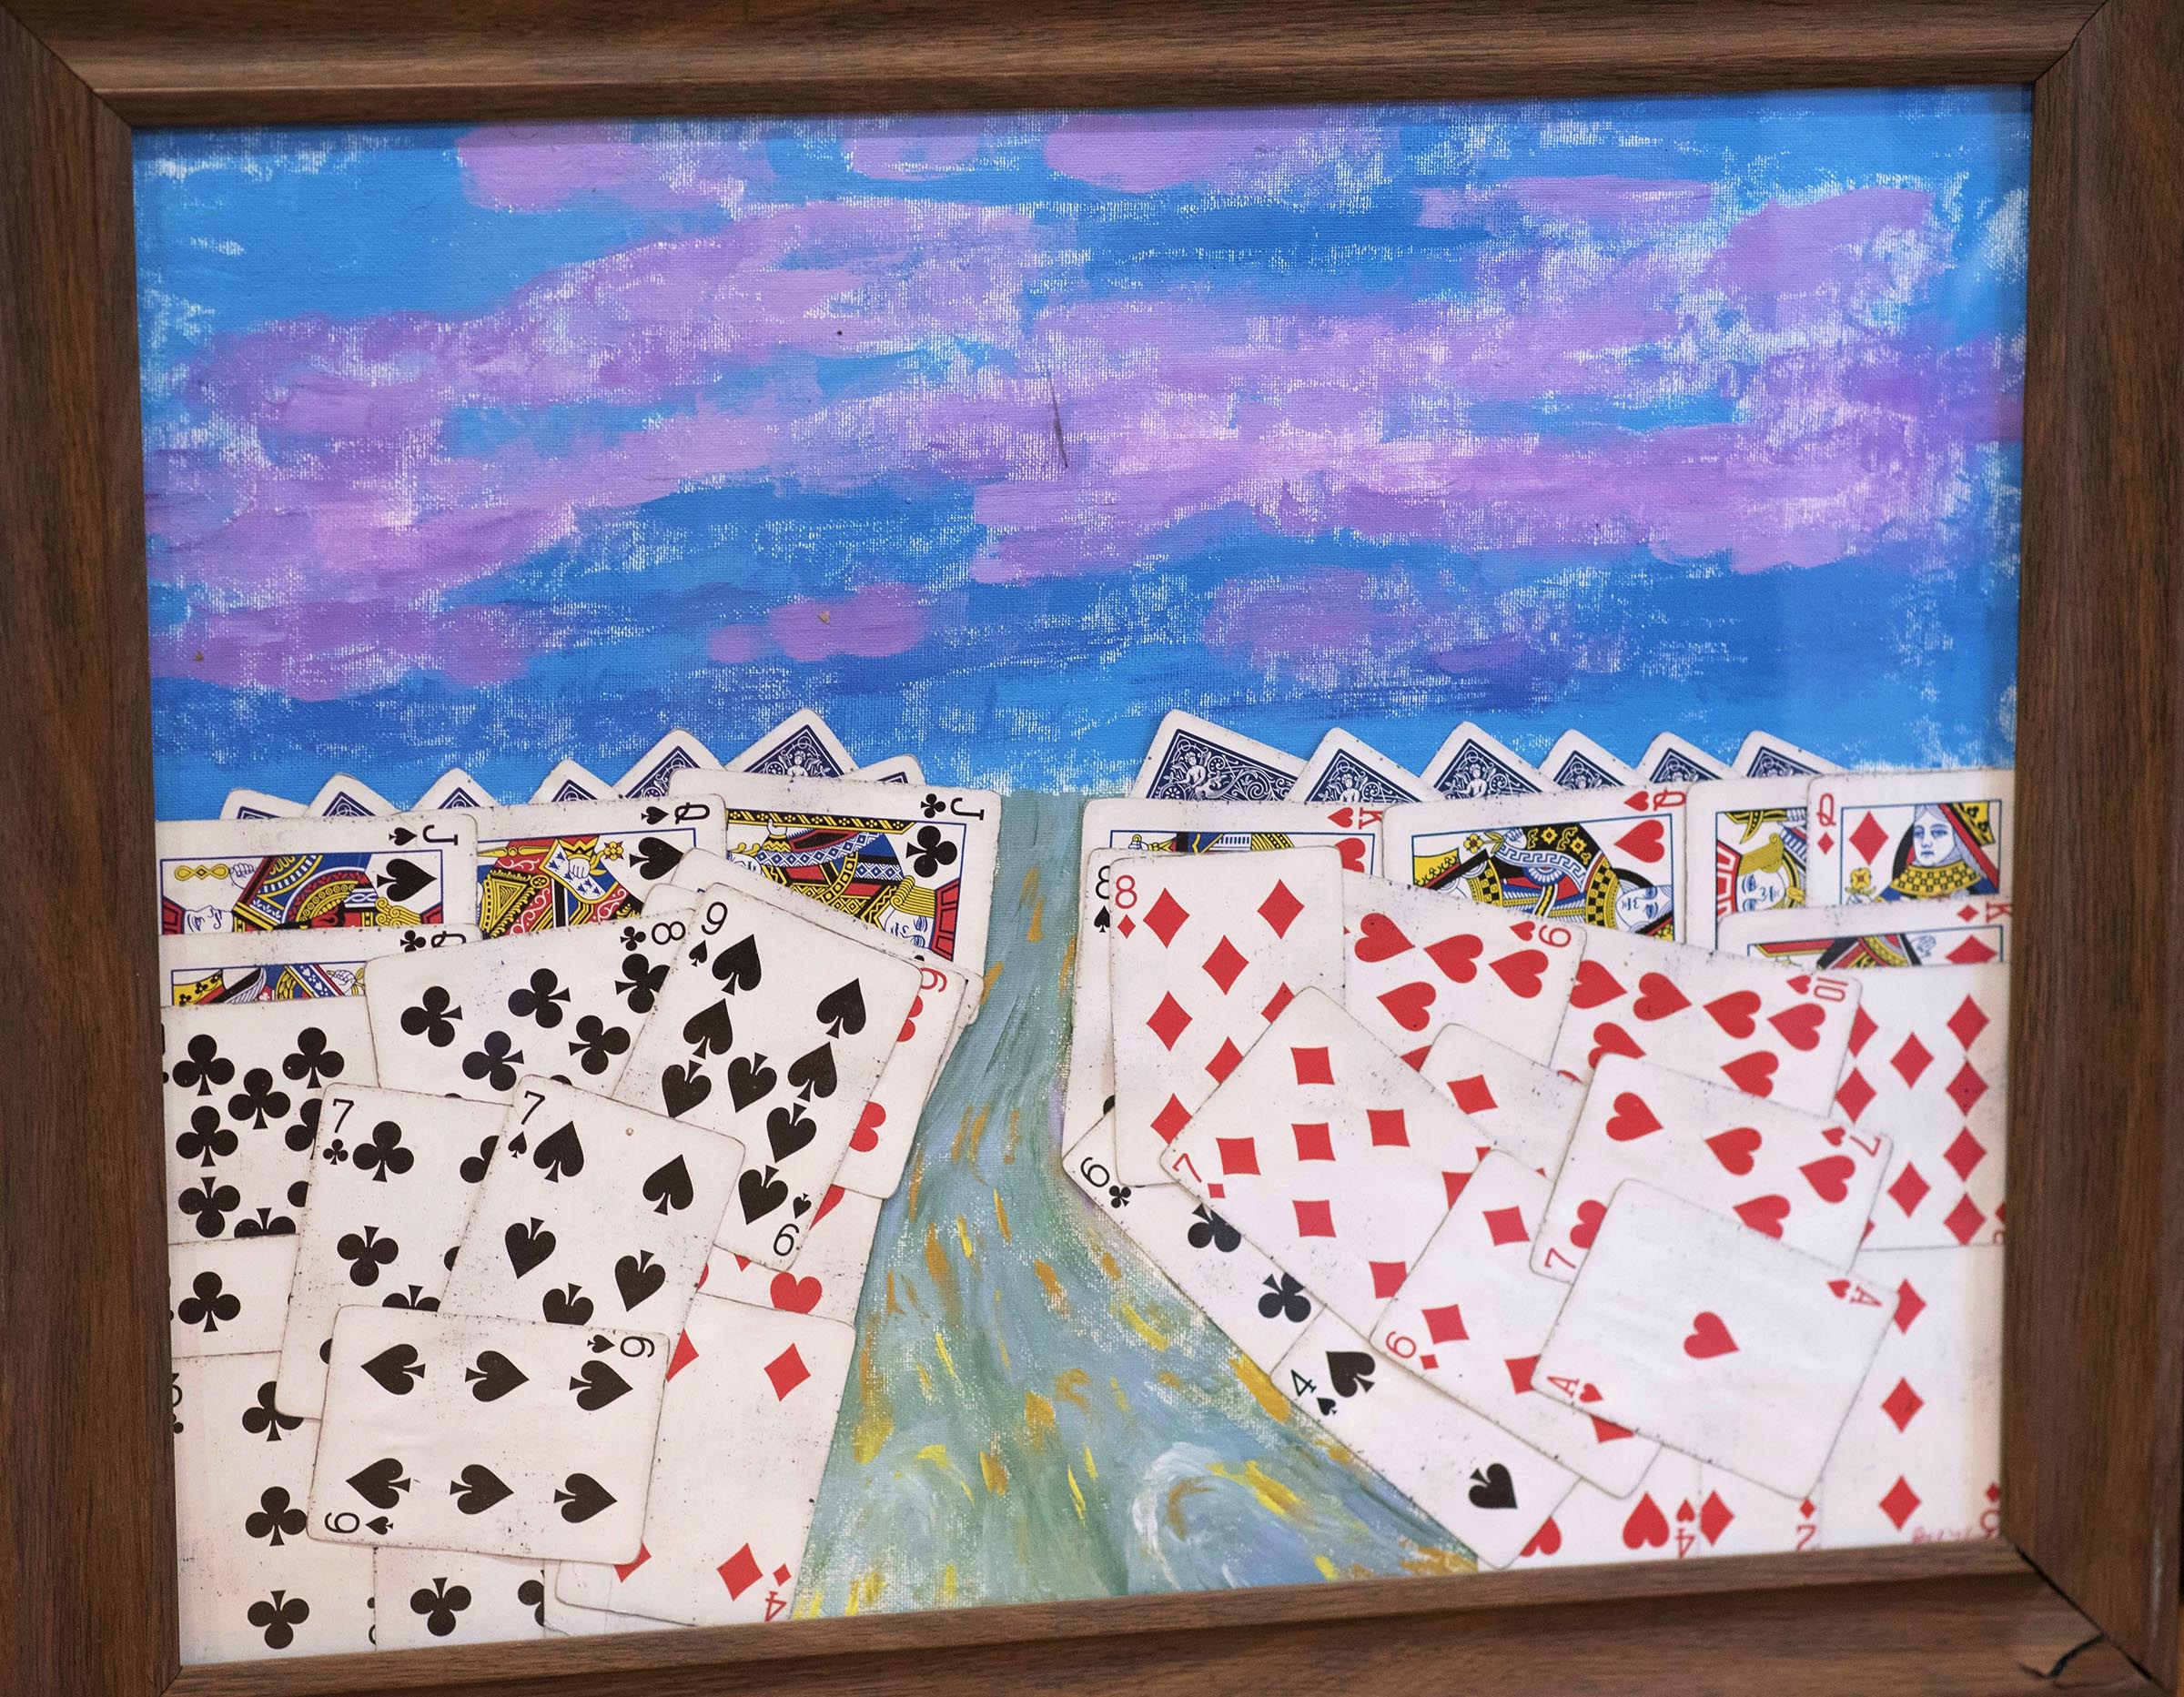 One of Pete's pieces of art, Go Fish is on display at The Gathering Place.